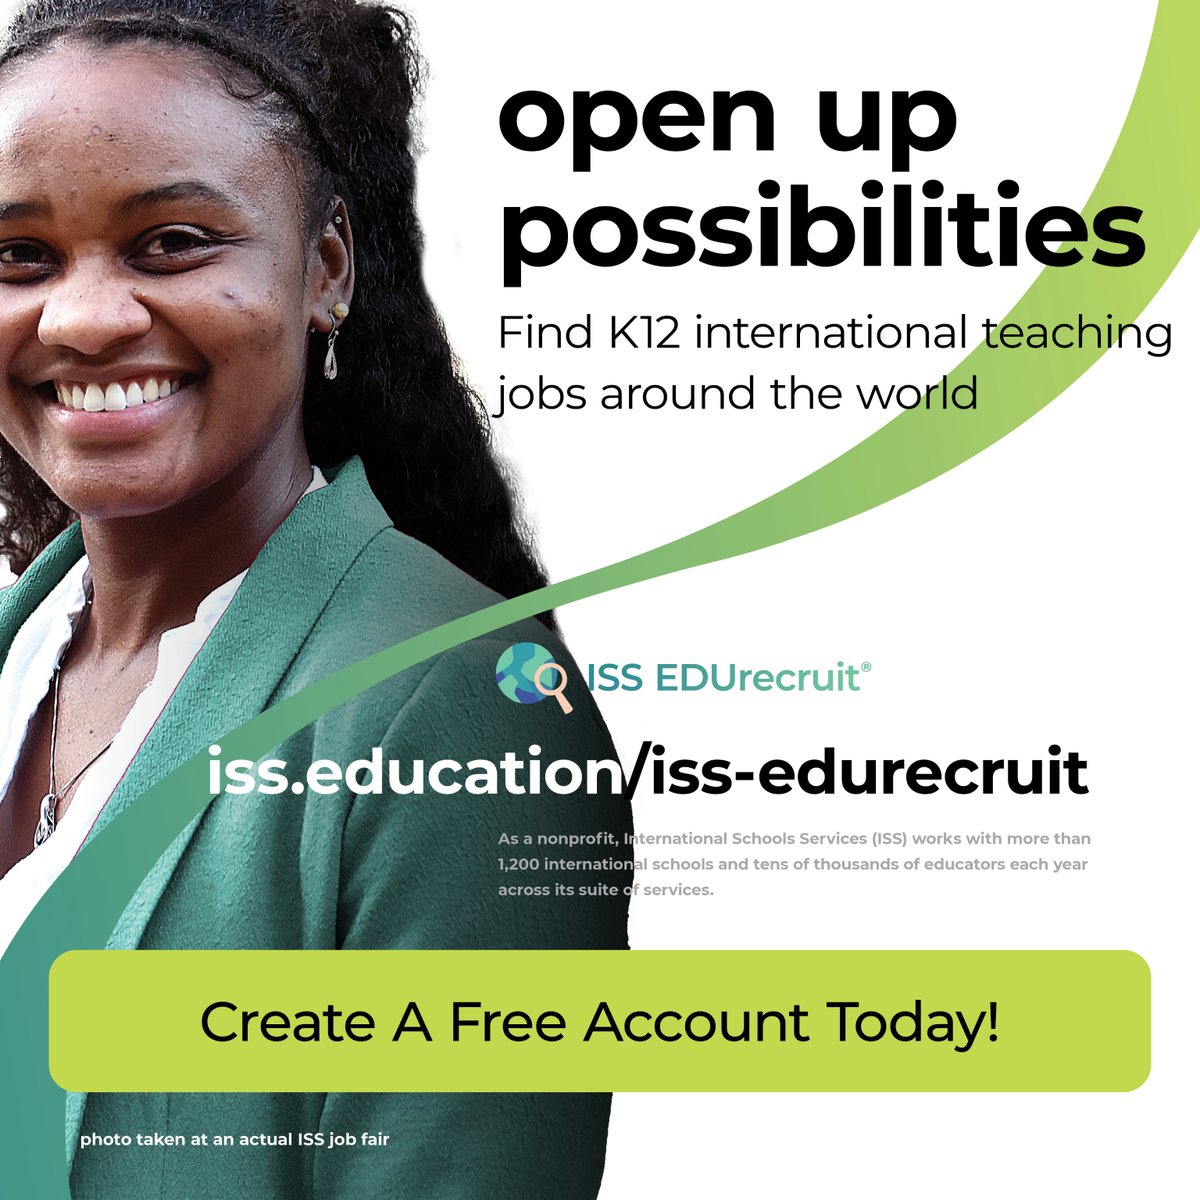 Where will your journey take you? Create a free ISS EDUrecruit account and take the next step in your teaching career! Learn more at iss.education/iss-edurecruit.  

#ISSedu #TeachAbroad #IntlEd